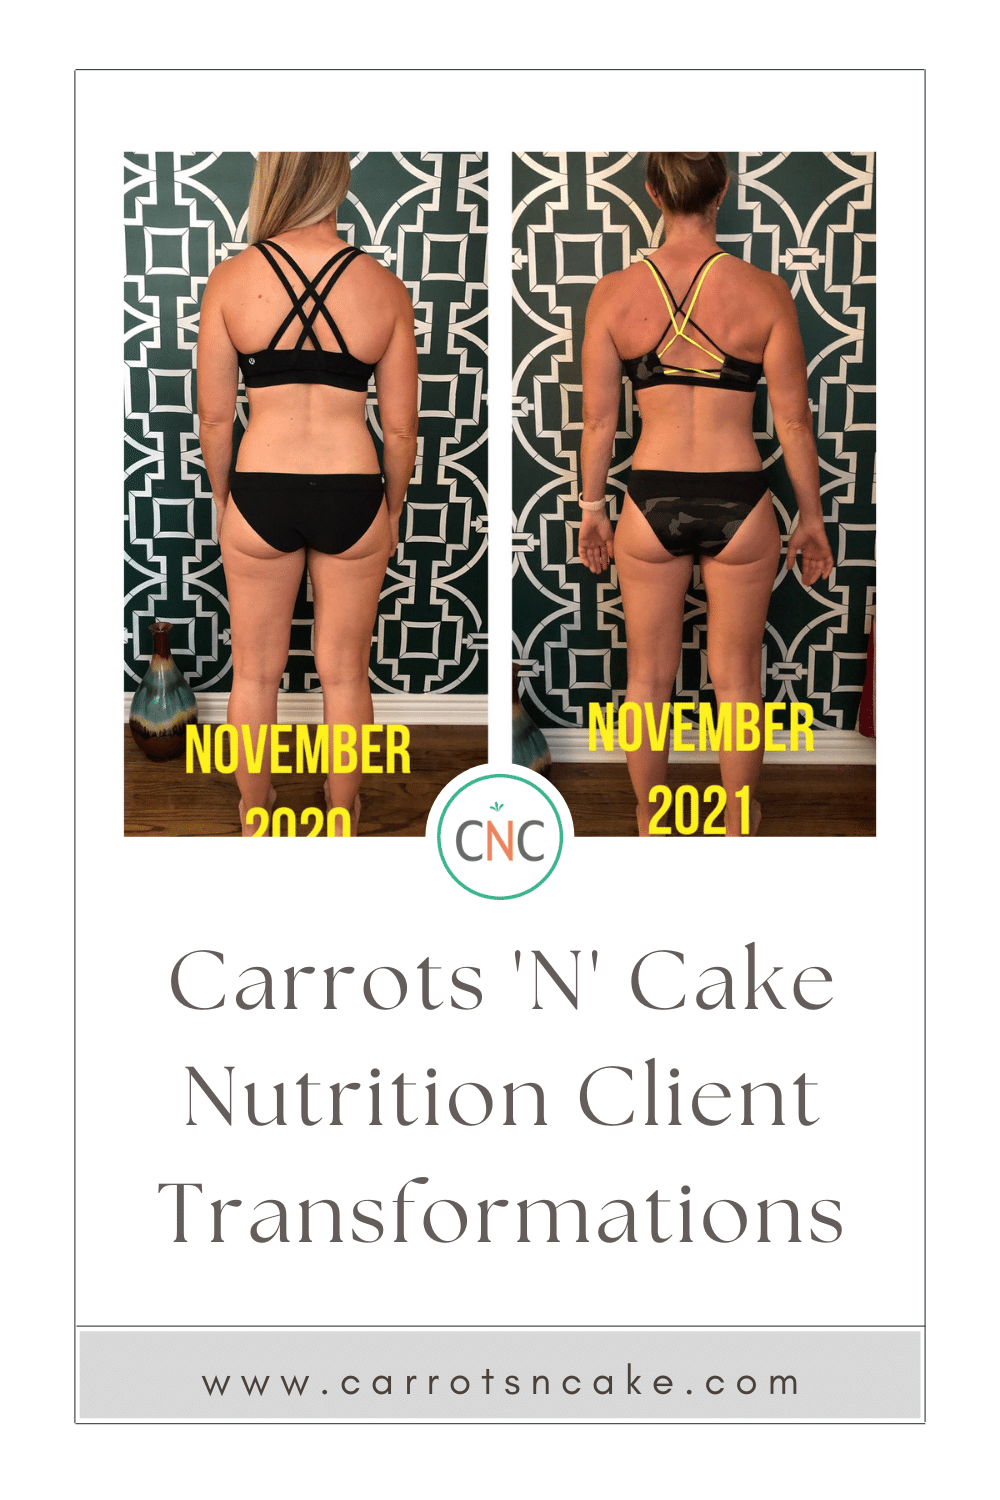 Carrots N Cake Nutrition Client Transformations